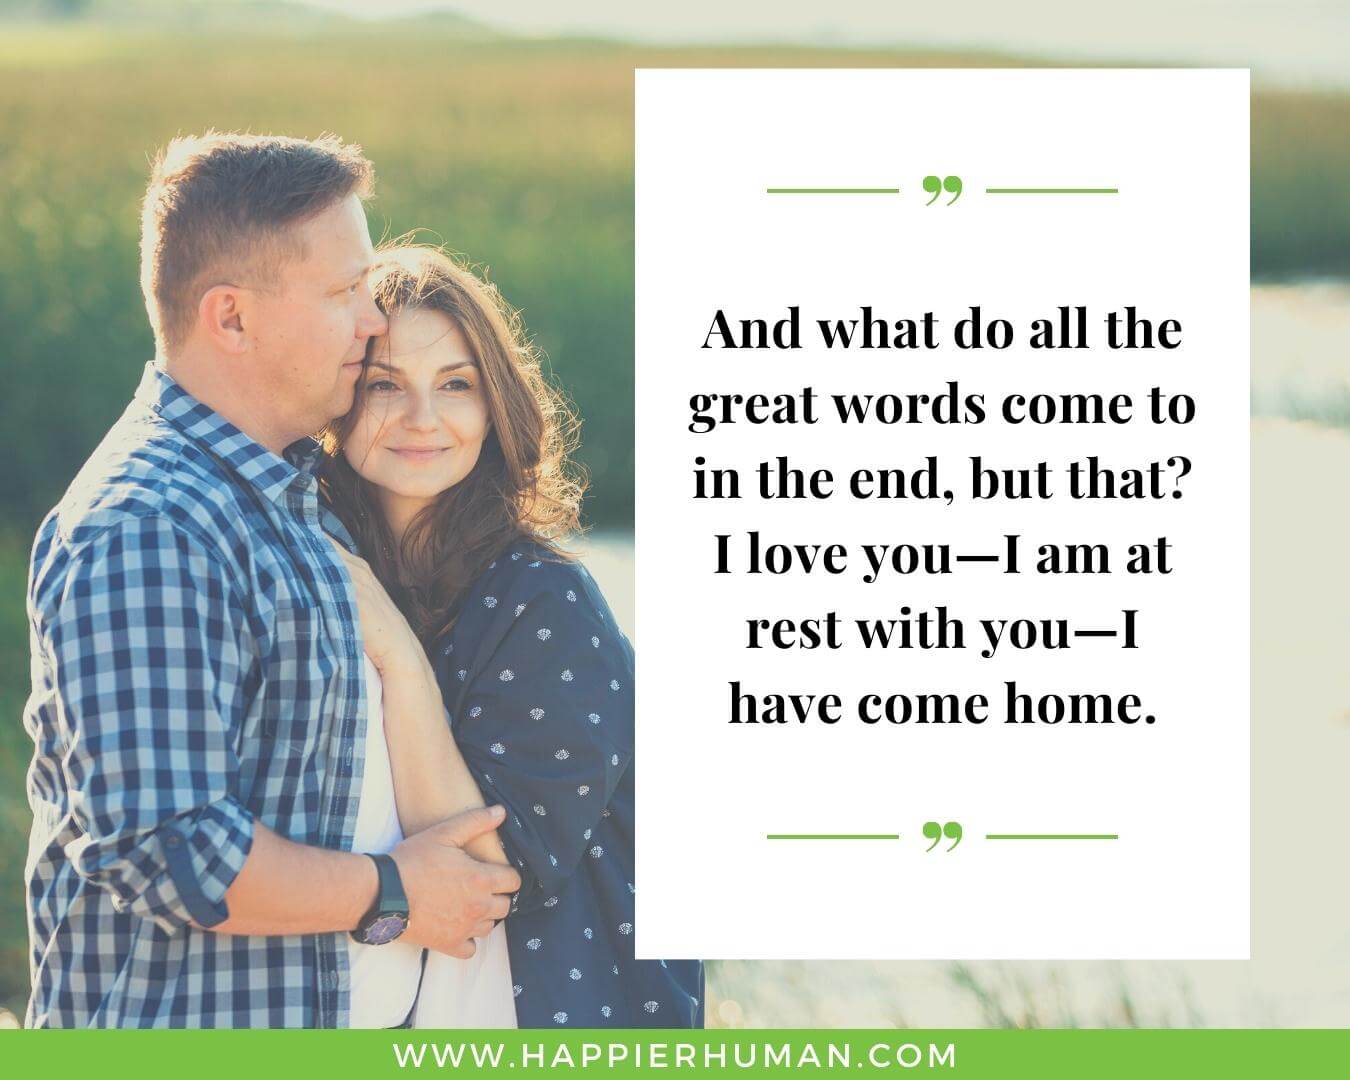 Inspiring Quotes of Love- “And what do all the great words come to in the end, but that? I love you—I am at rest with you—I have come home.”